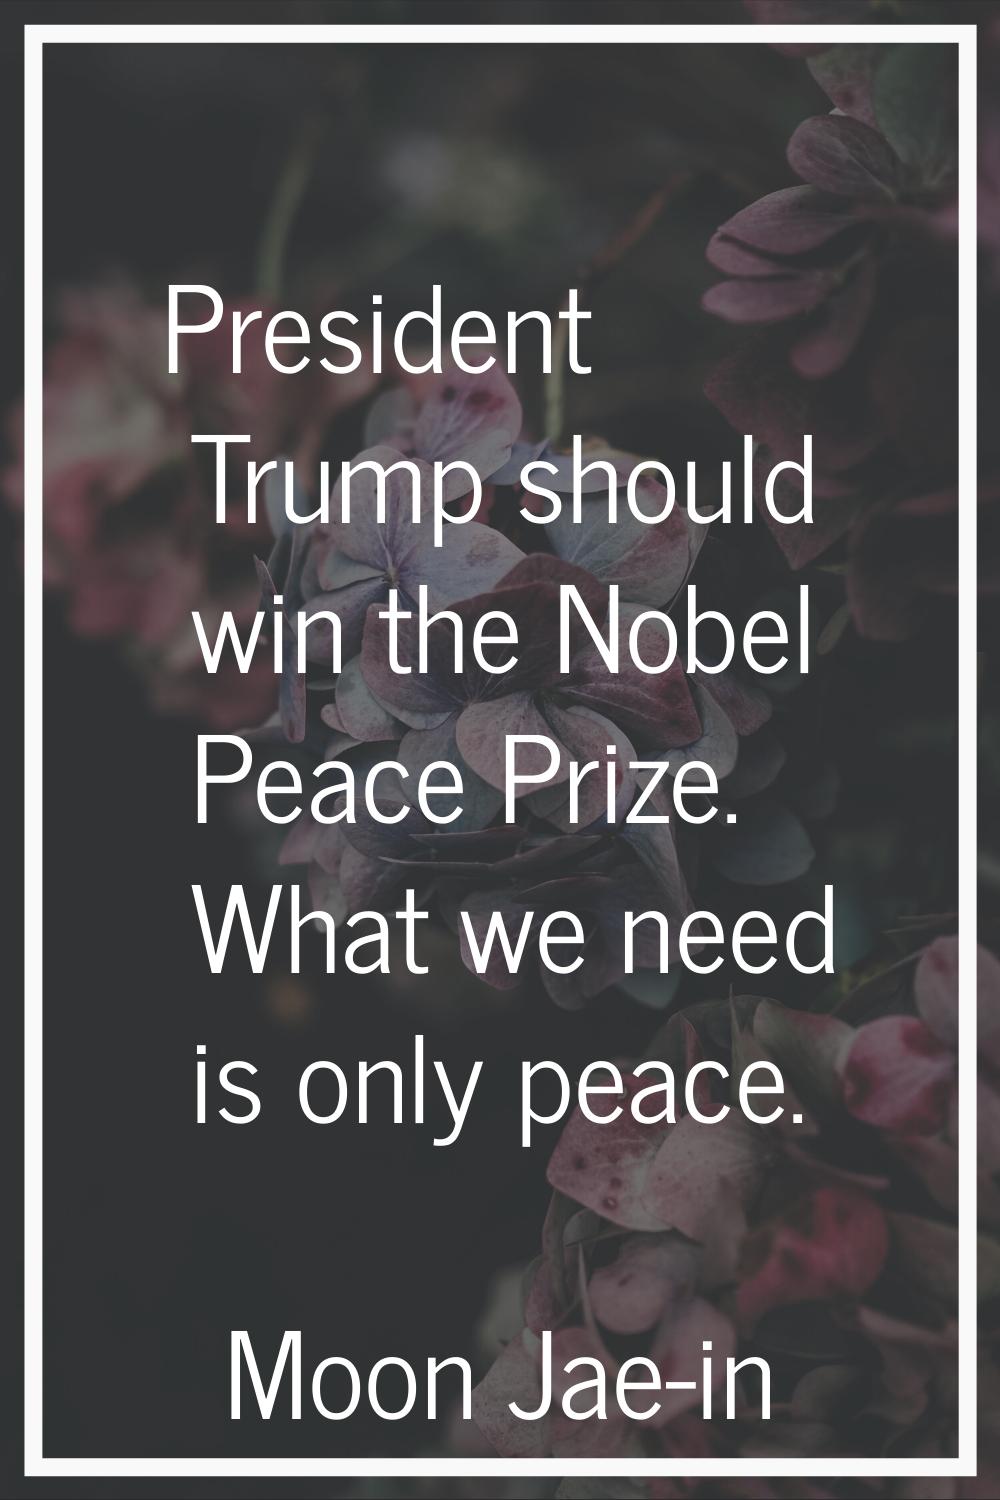 President Trump should win the Nobel Peace Prize. What we need is only peace.